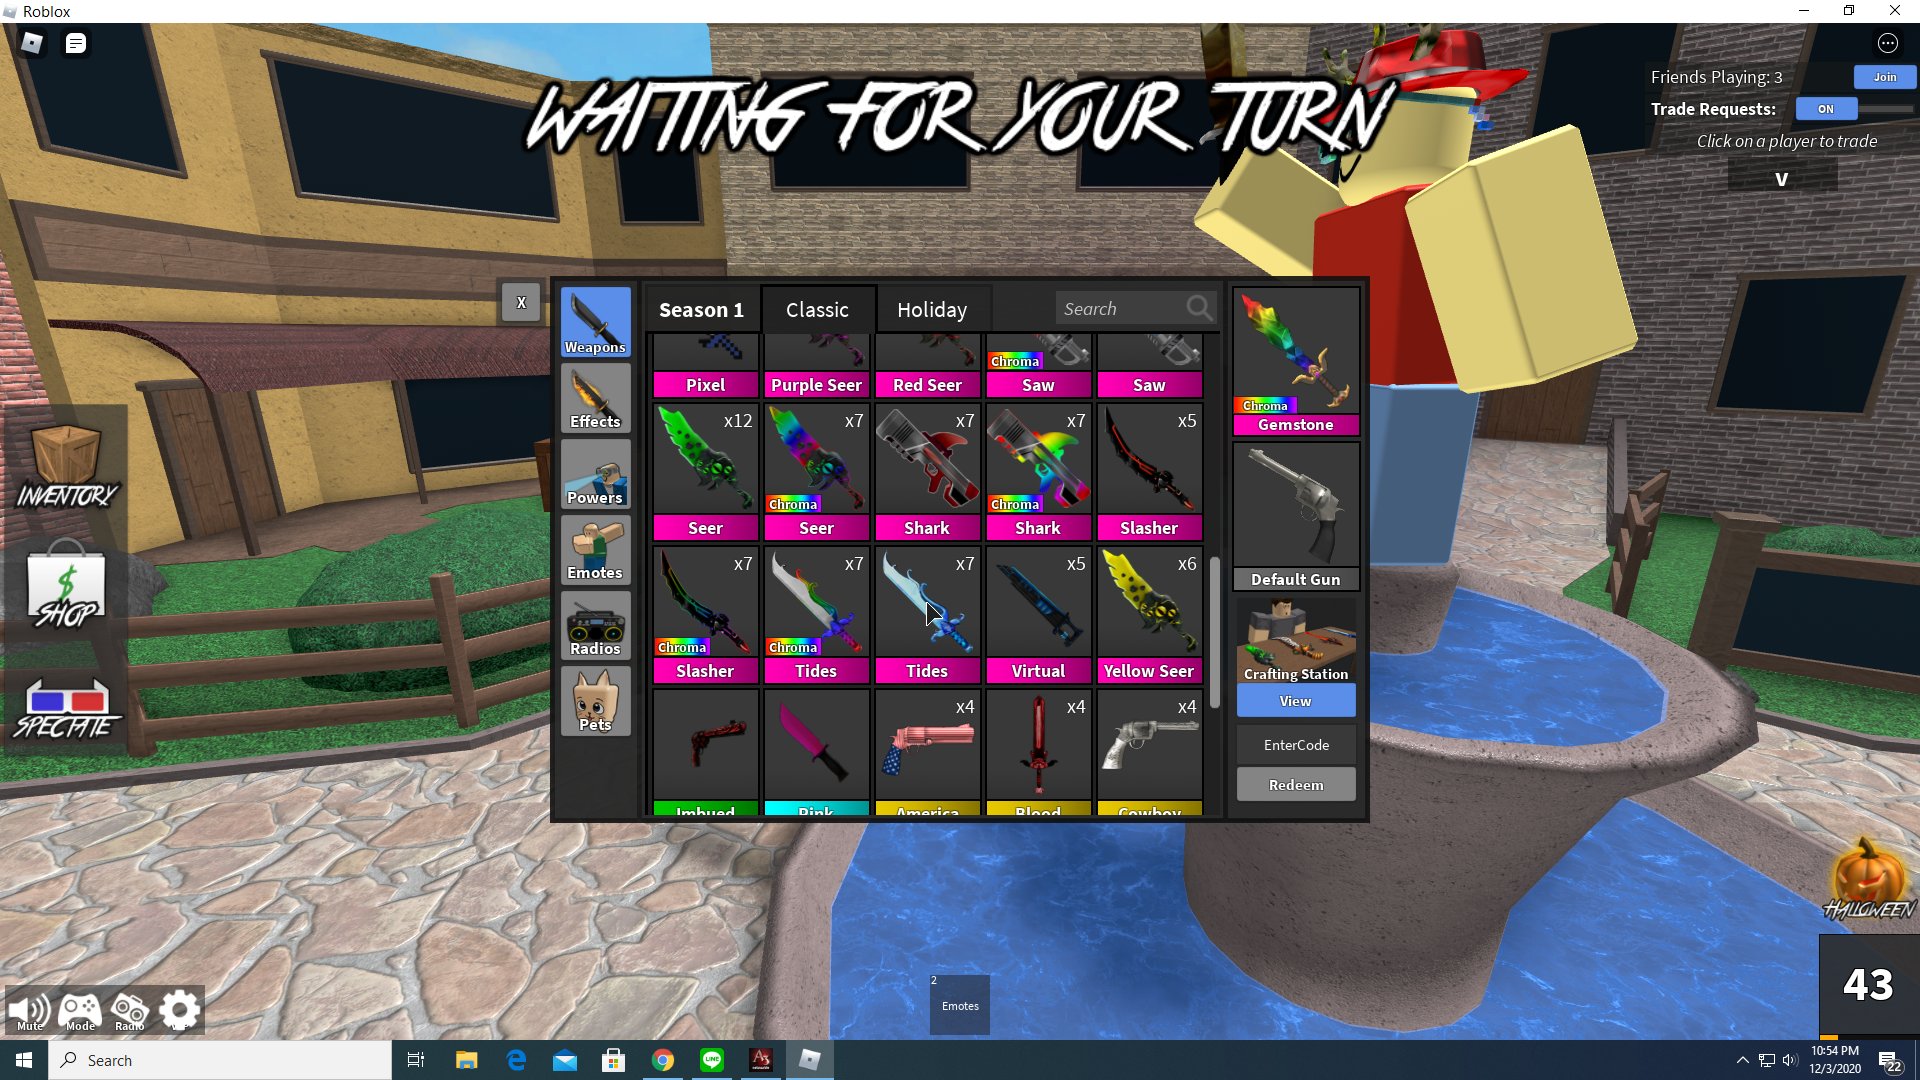 on X: Trading chroma seer. Any offers? #mm2trading #Mm2trades #mm2trade # MM2 #mm2 #roblox  / X